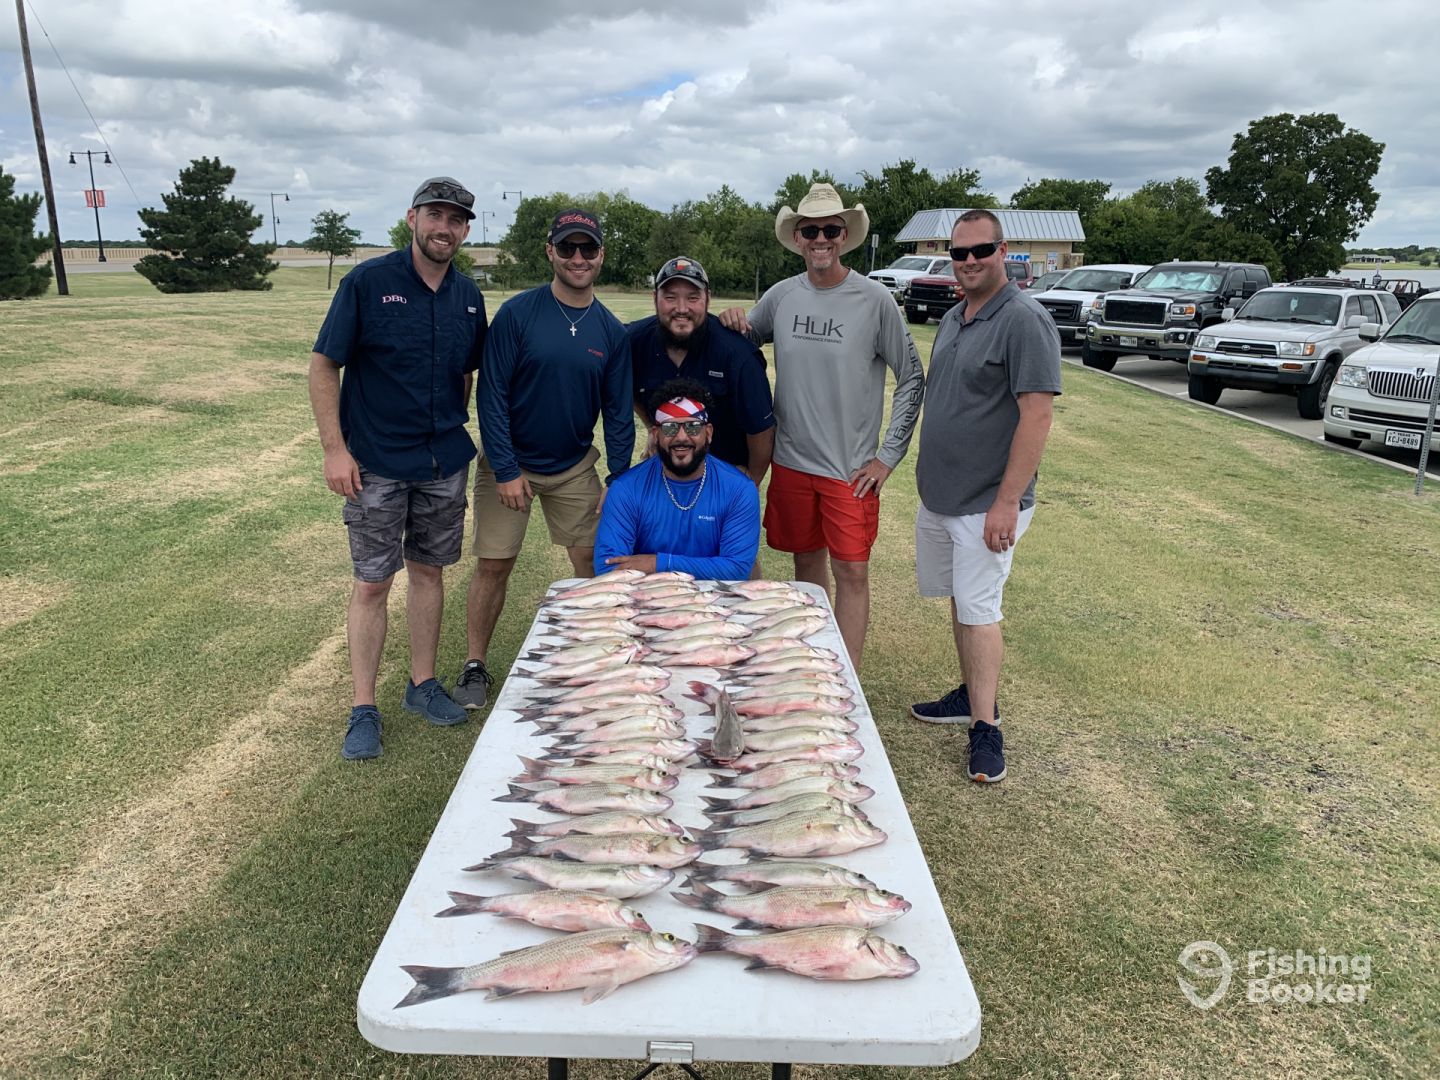 Lake Lewisville has been on fire! Little Elm Fishing